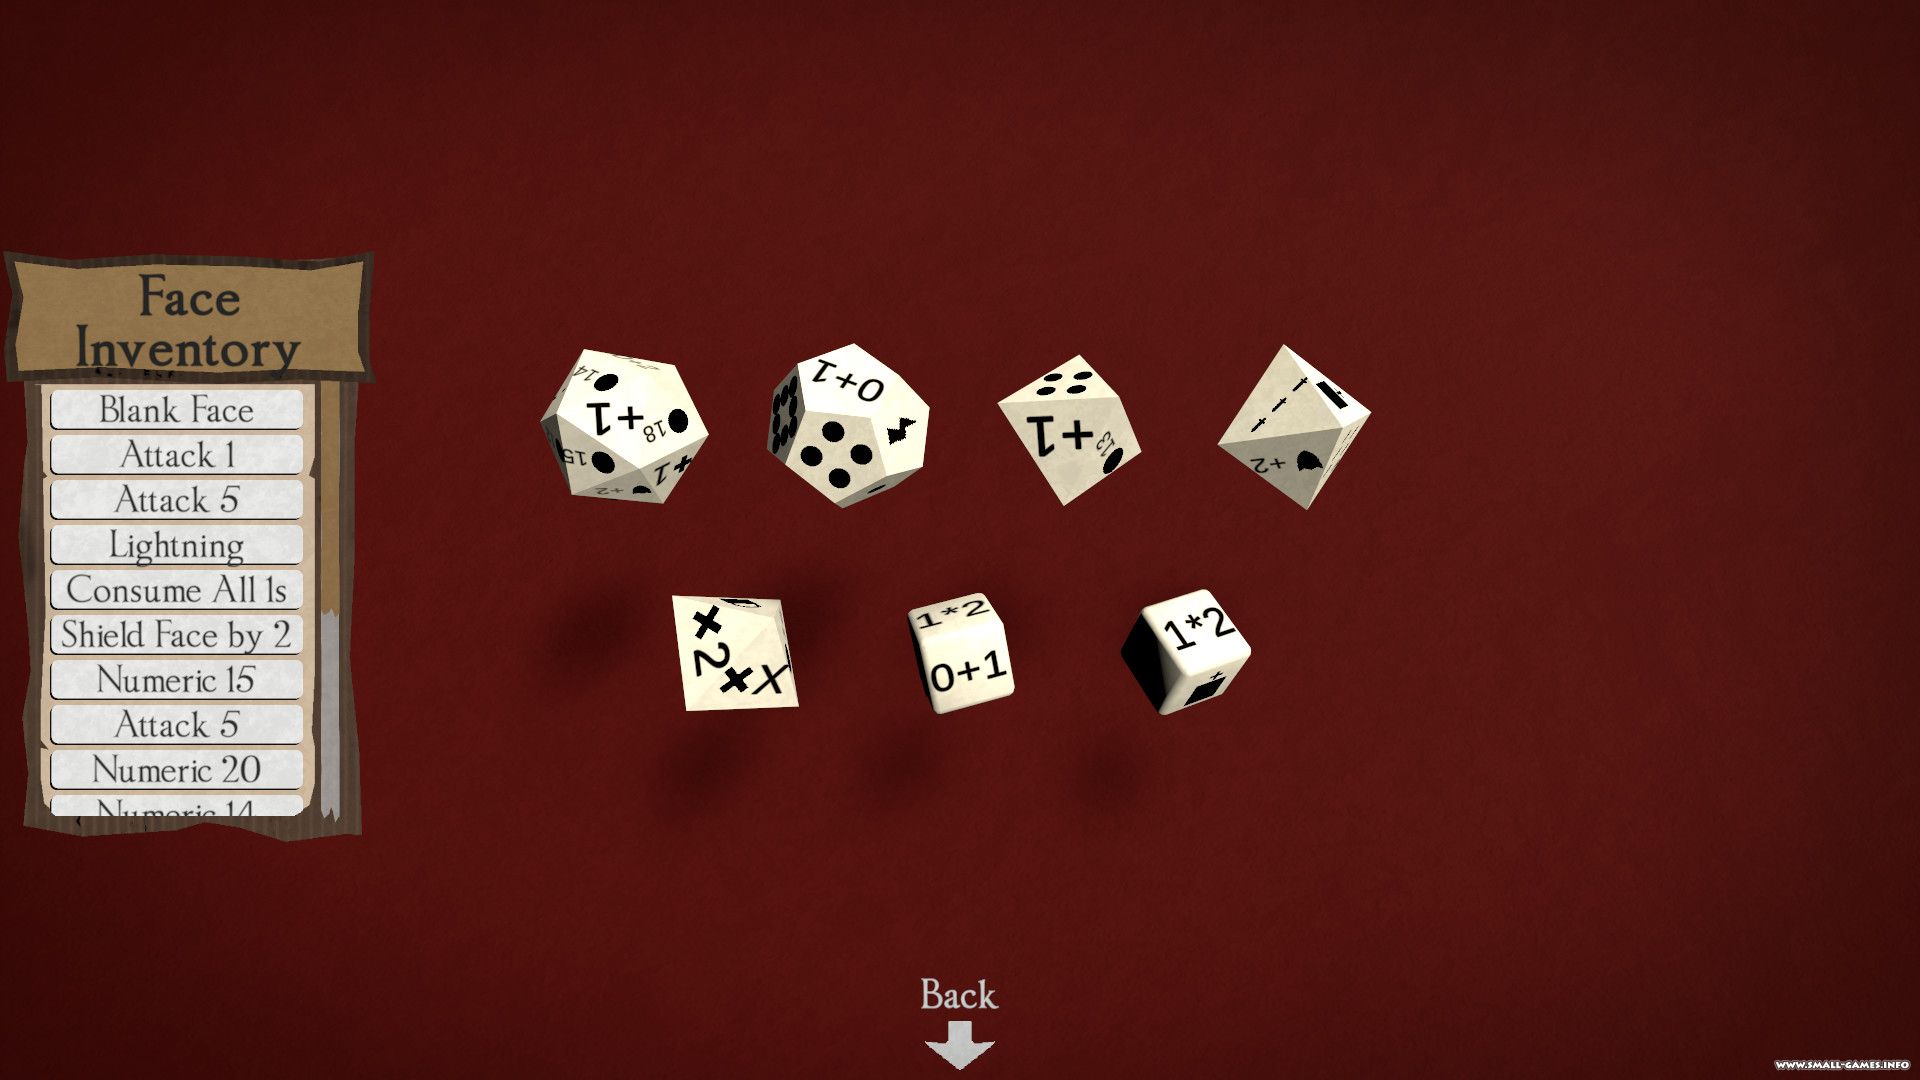 Dice and roll когда выйдет. Roll a die. Alcatraz Demon dice. Oz - Roll the dice. Roll the dice v0.2.0.